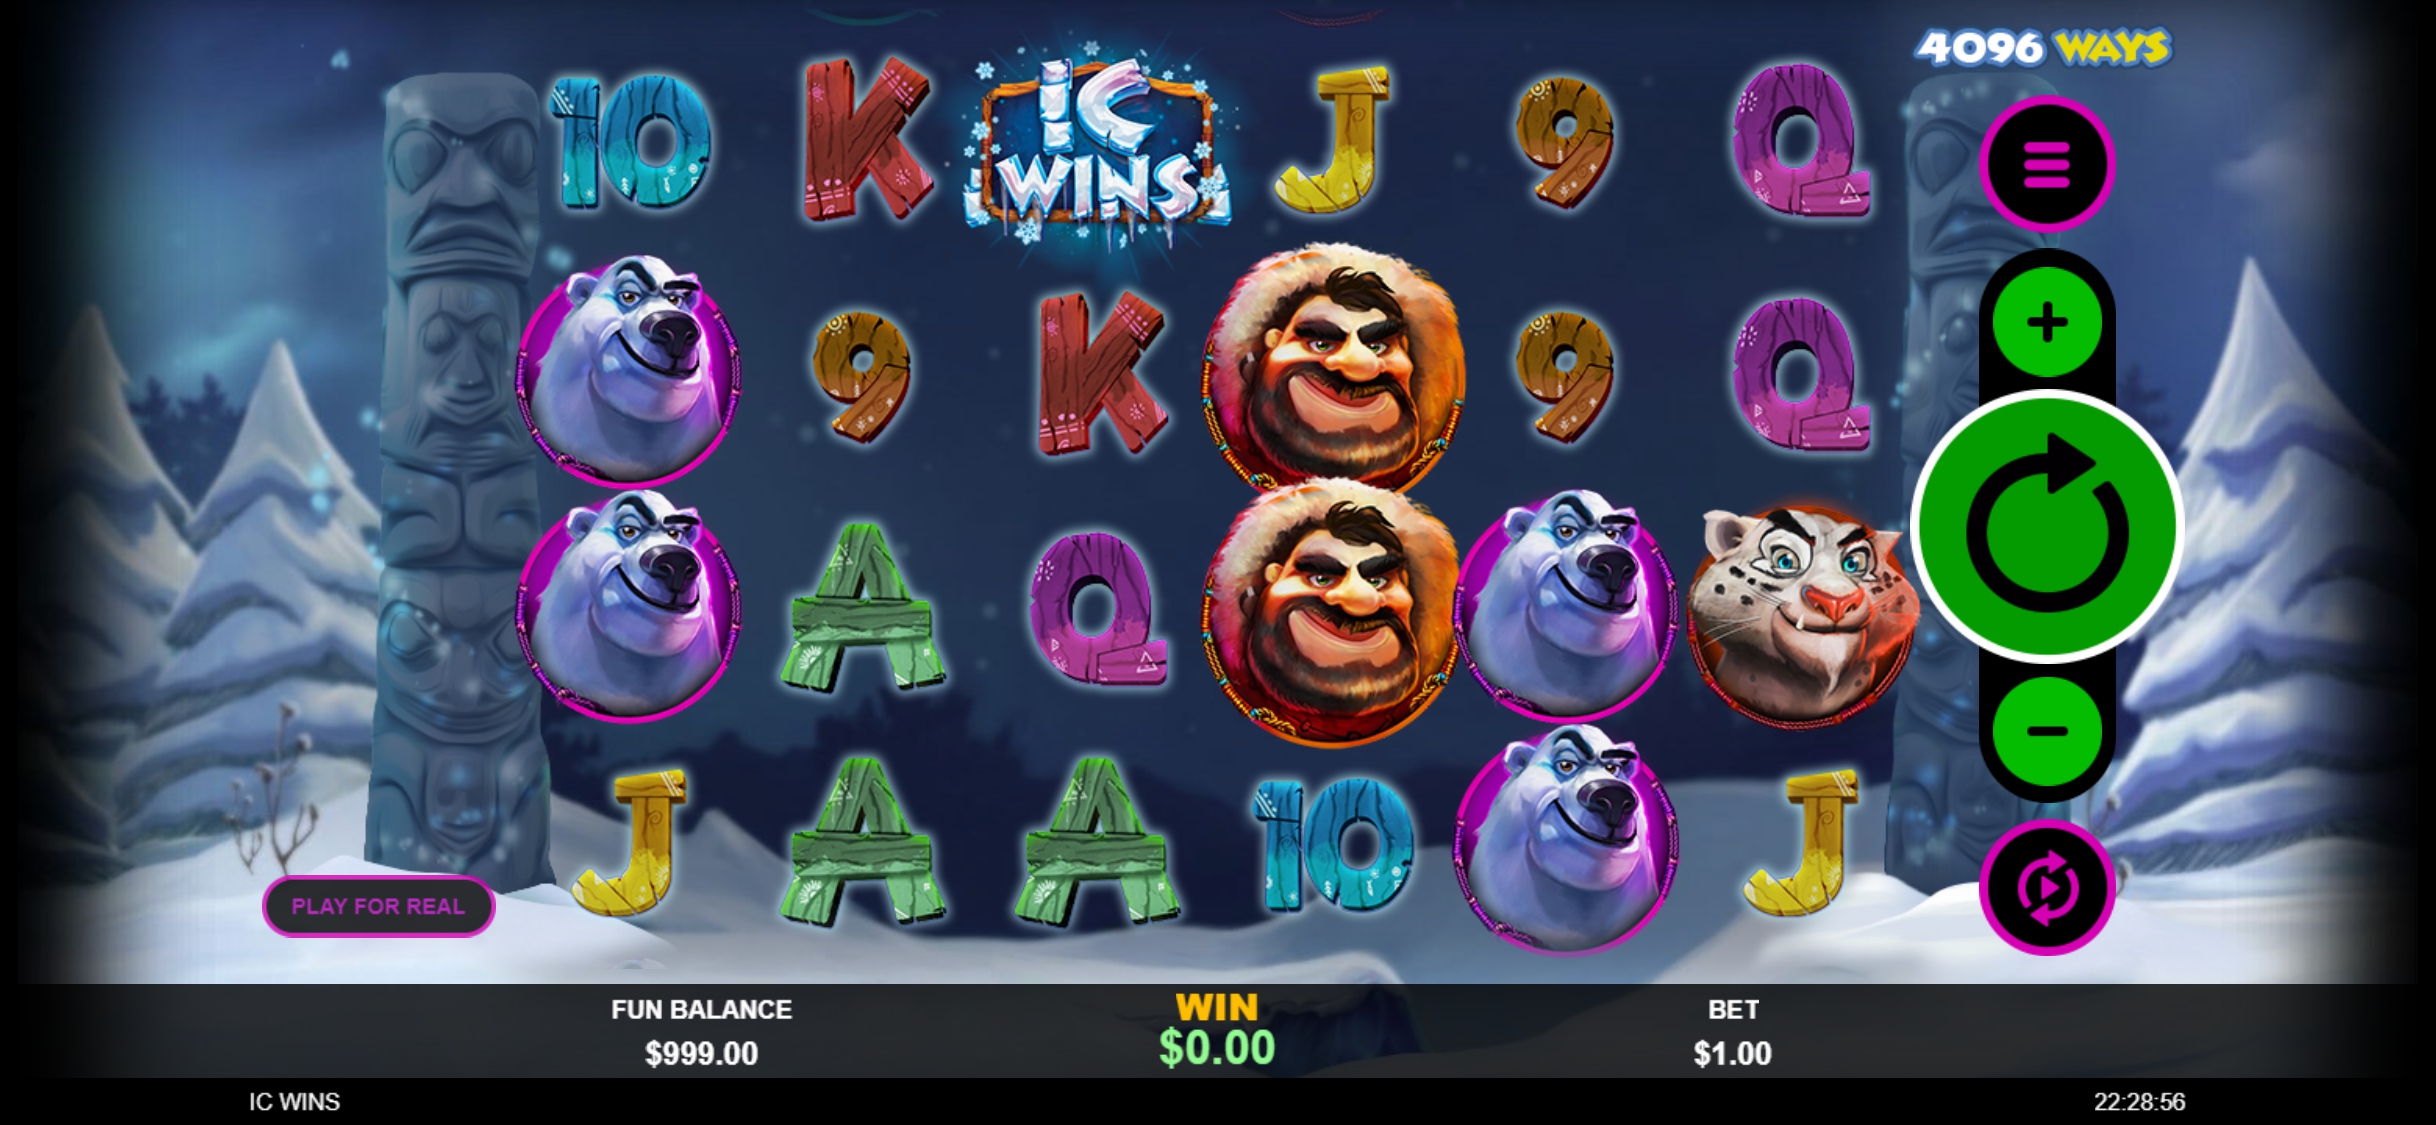 Buzz Luck Casino Mobile Slot Games Review